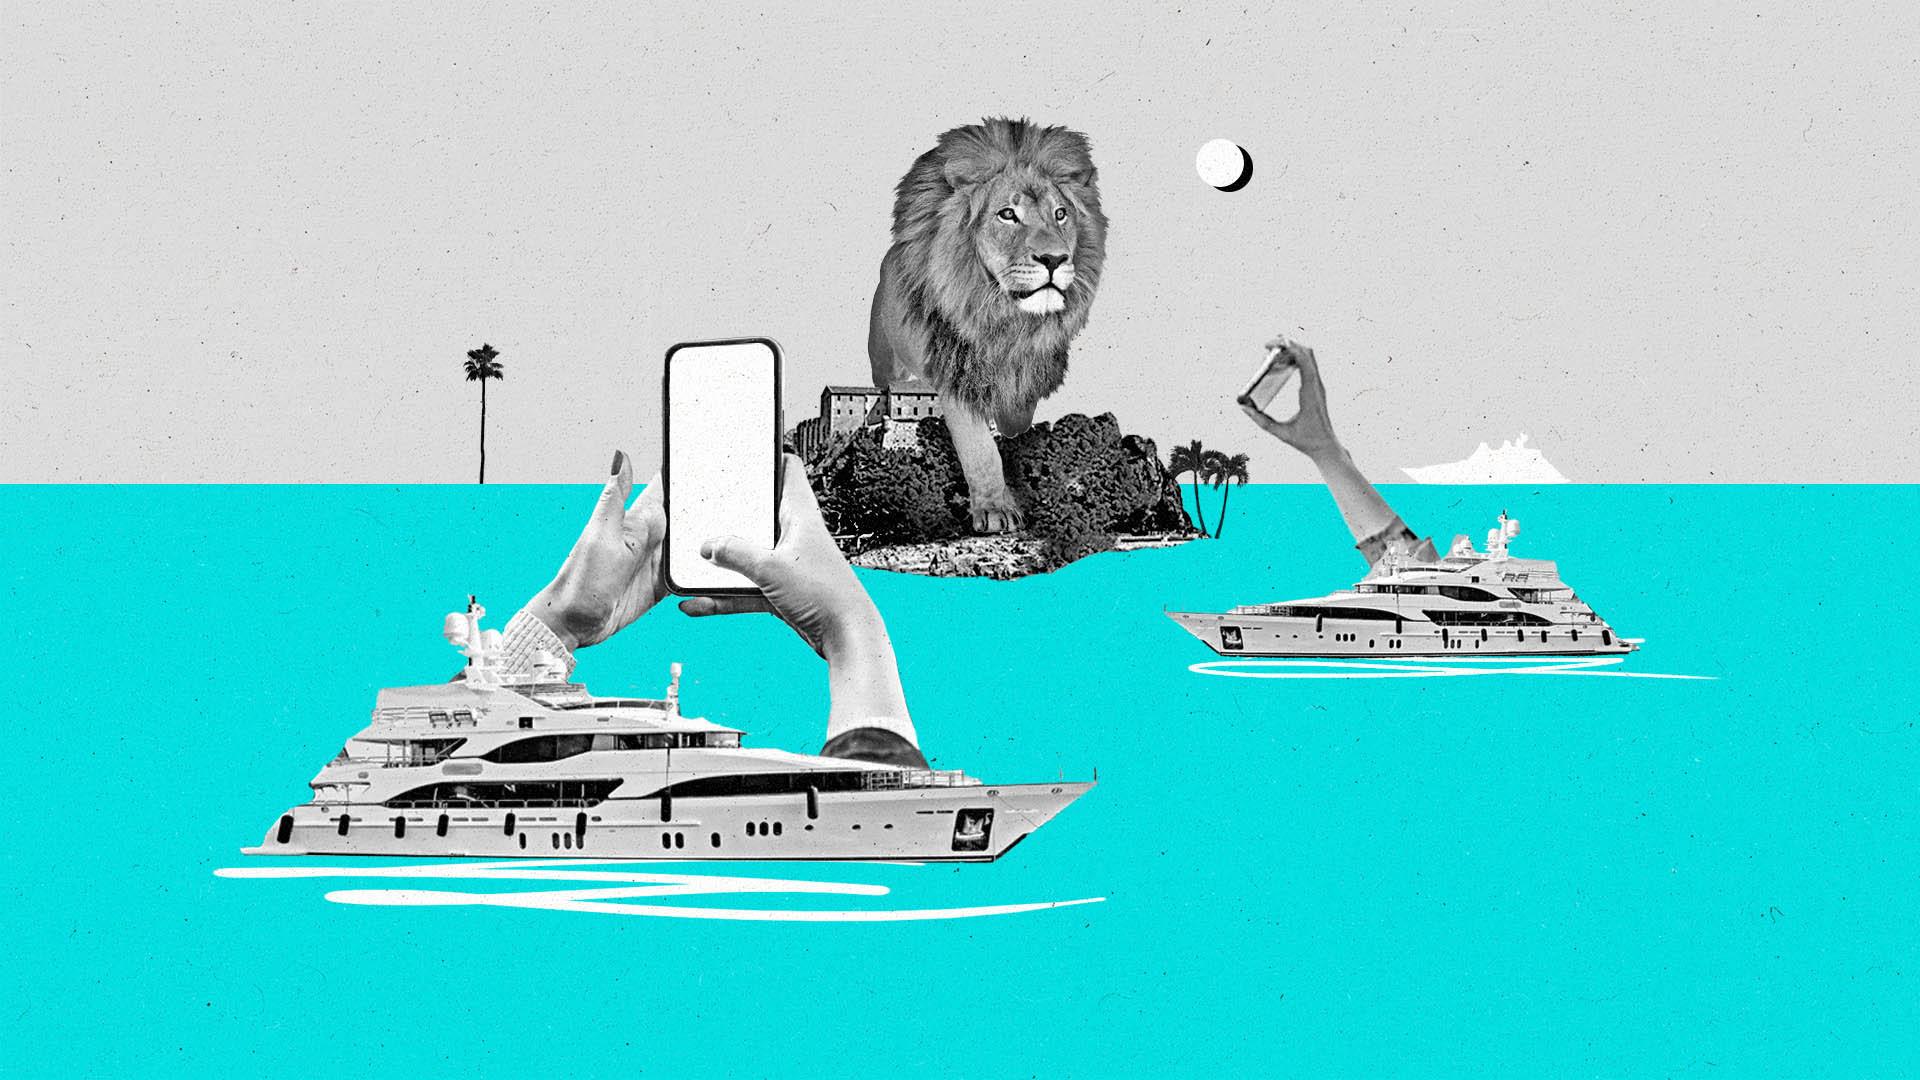 Two yachts with hands holding smartphones sail and face an oversized lion on an island.